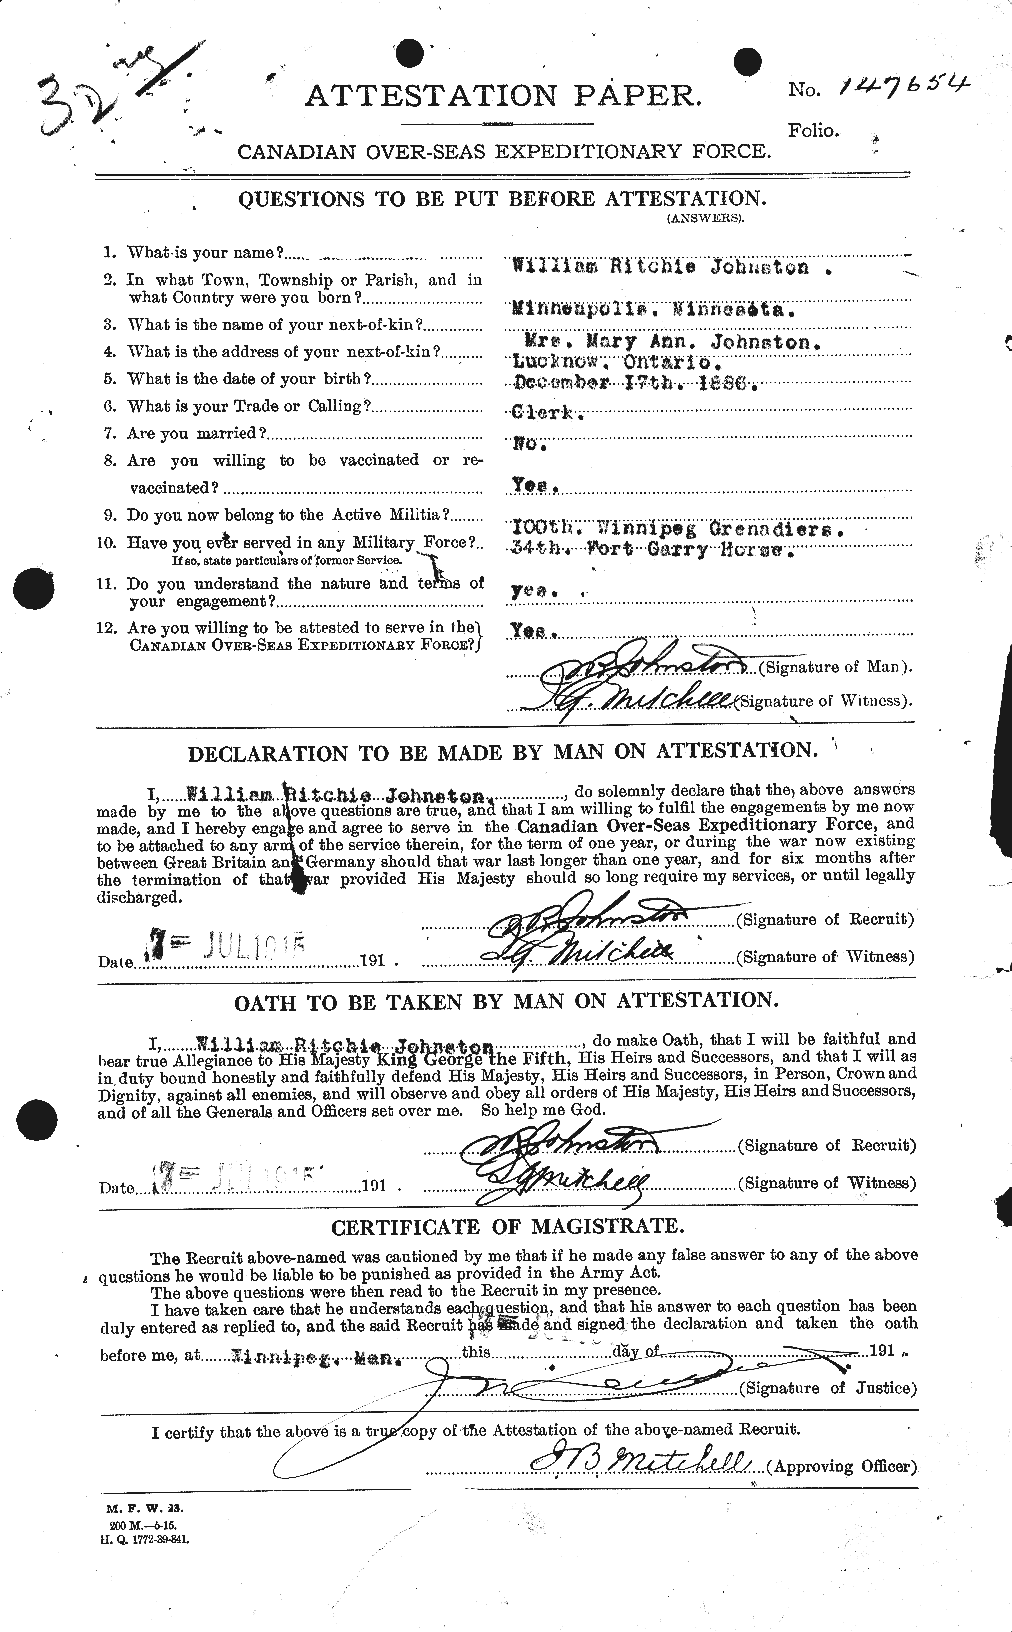 Personnel Records of the First World War - CEF 429611a